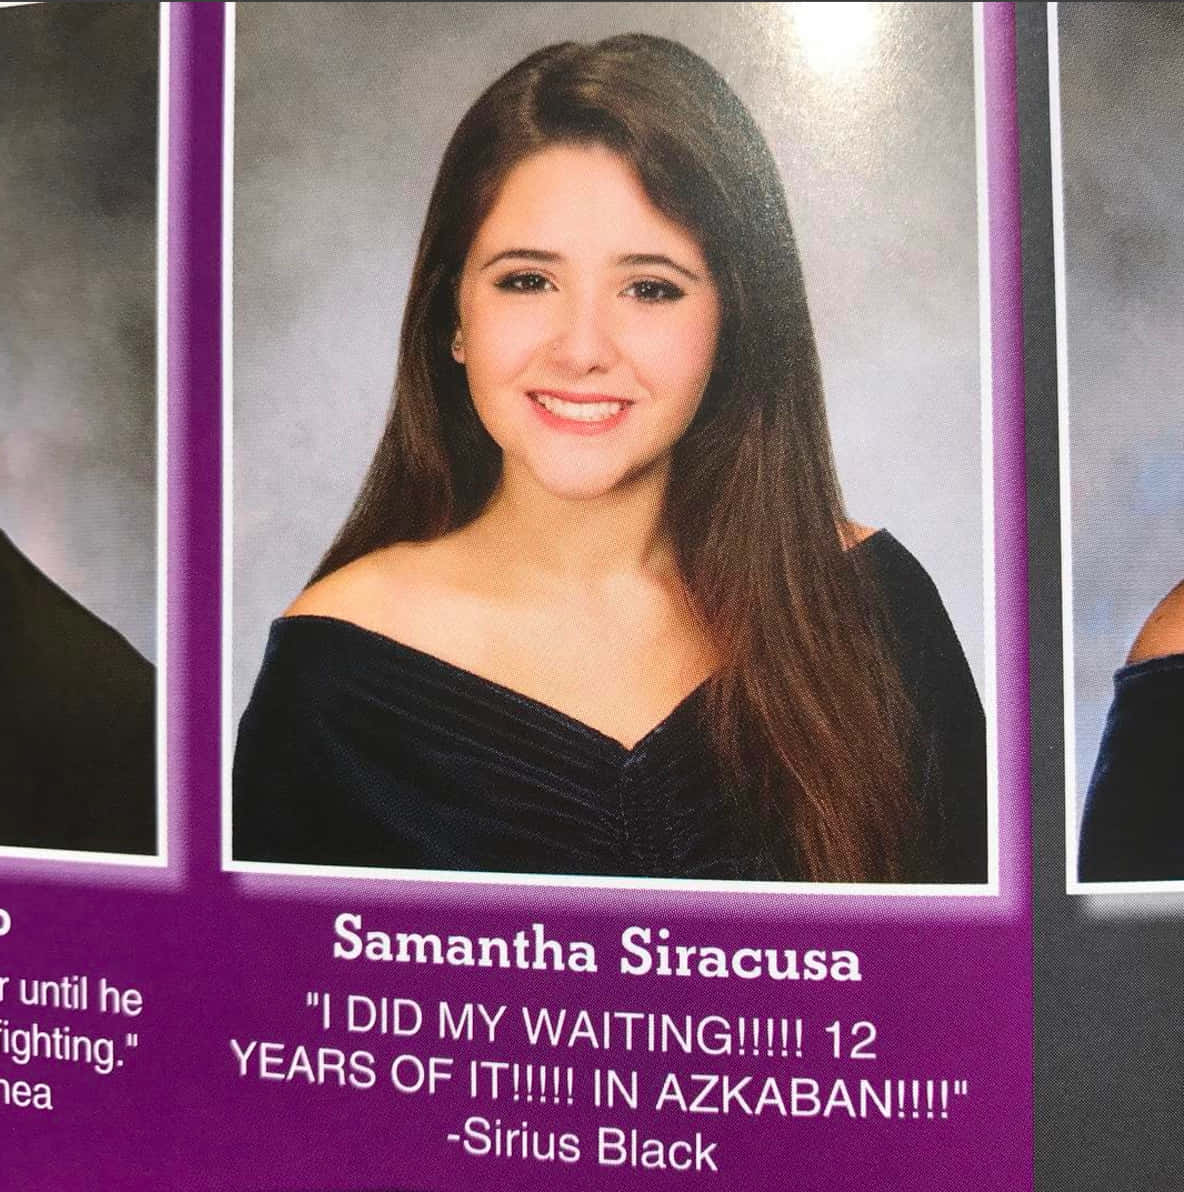 Download Samantha Strauss's High School Yearbook Photo | Wallpapers.com